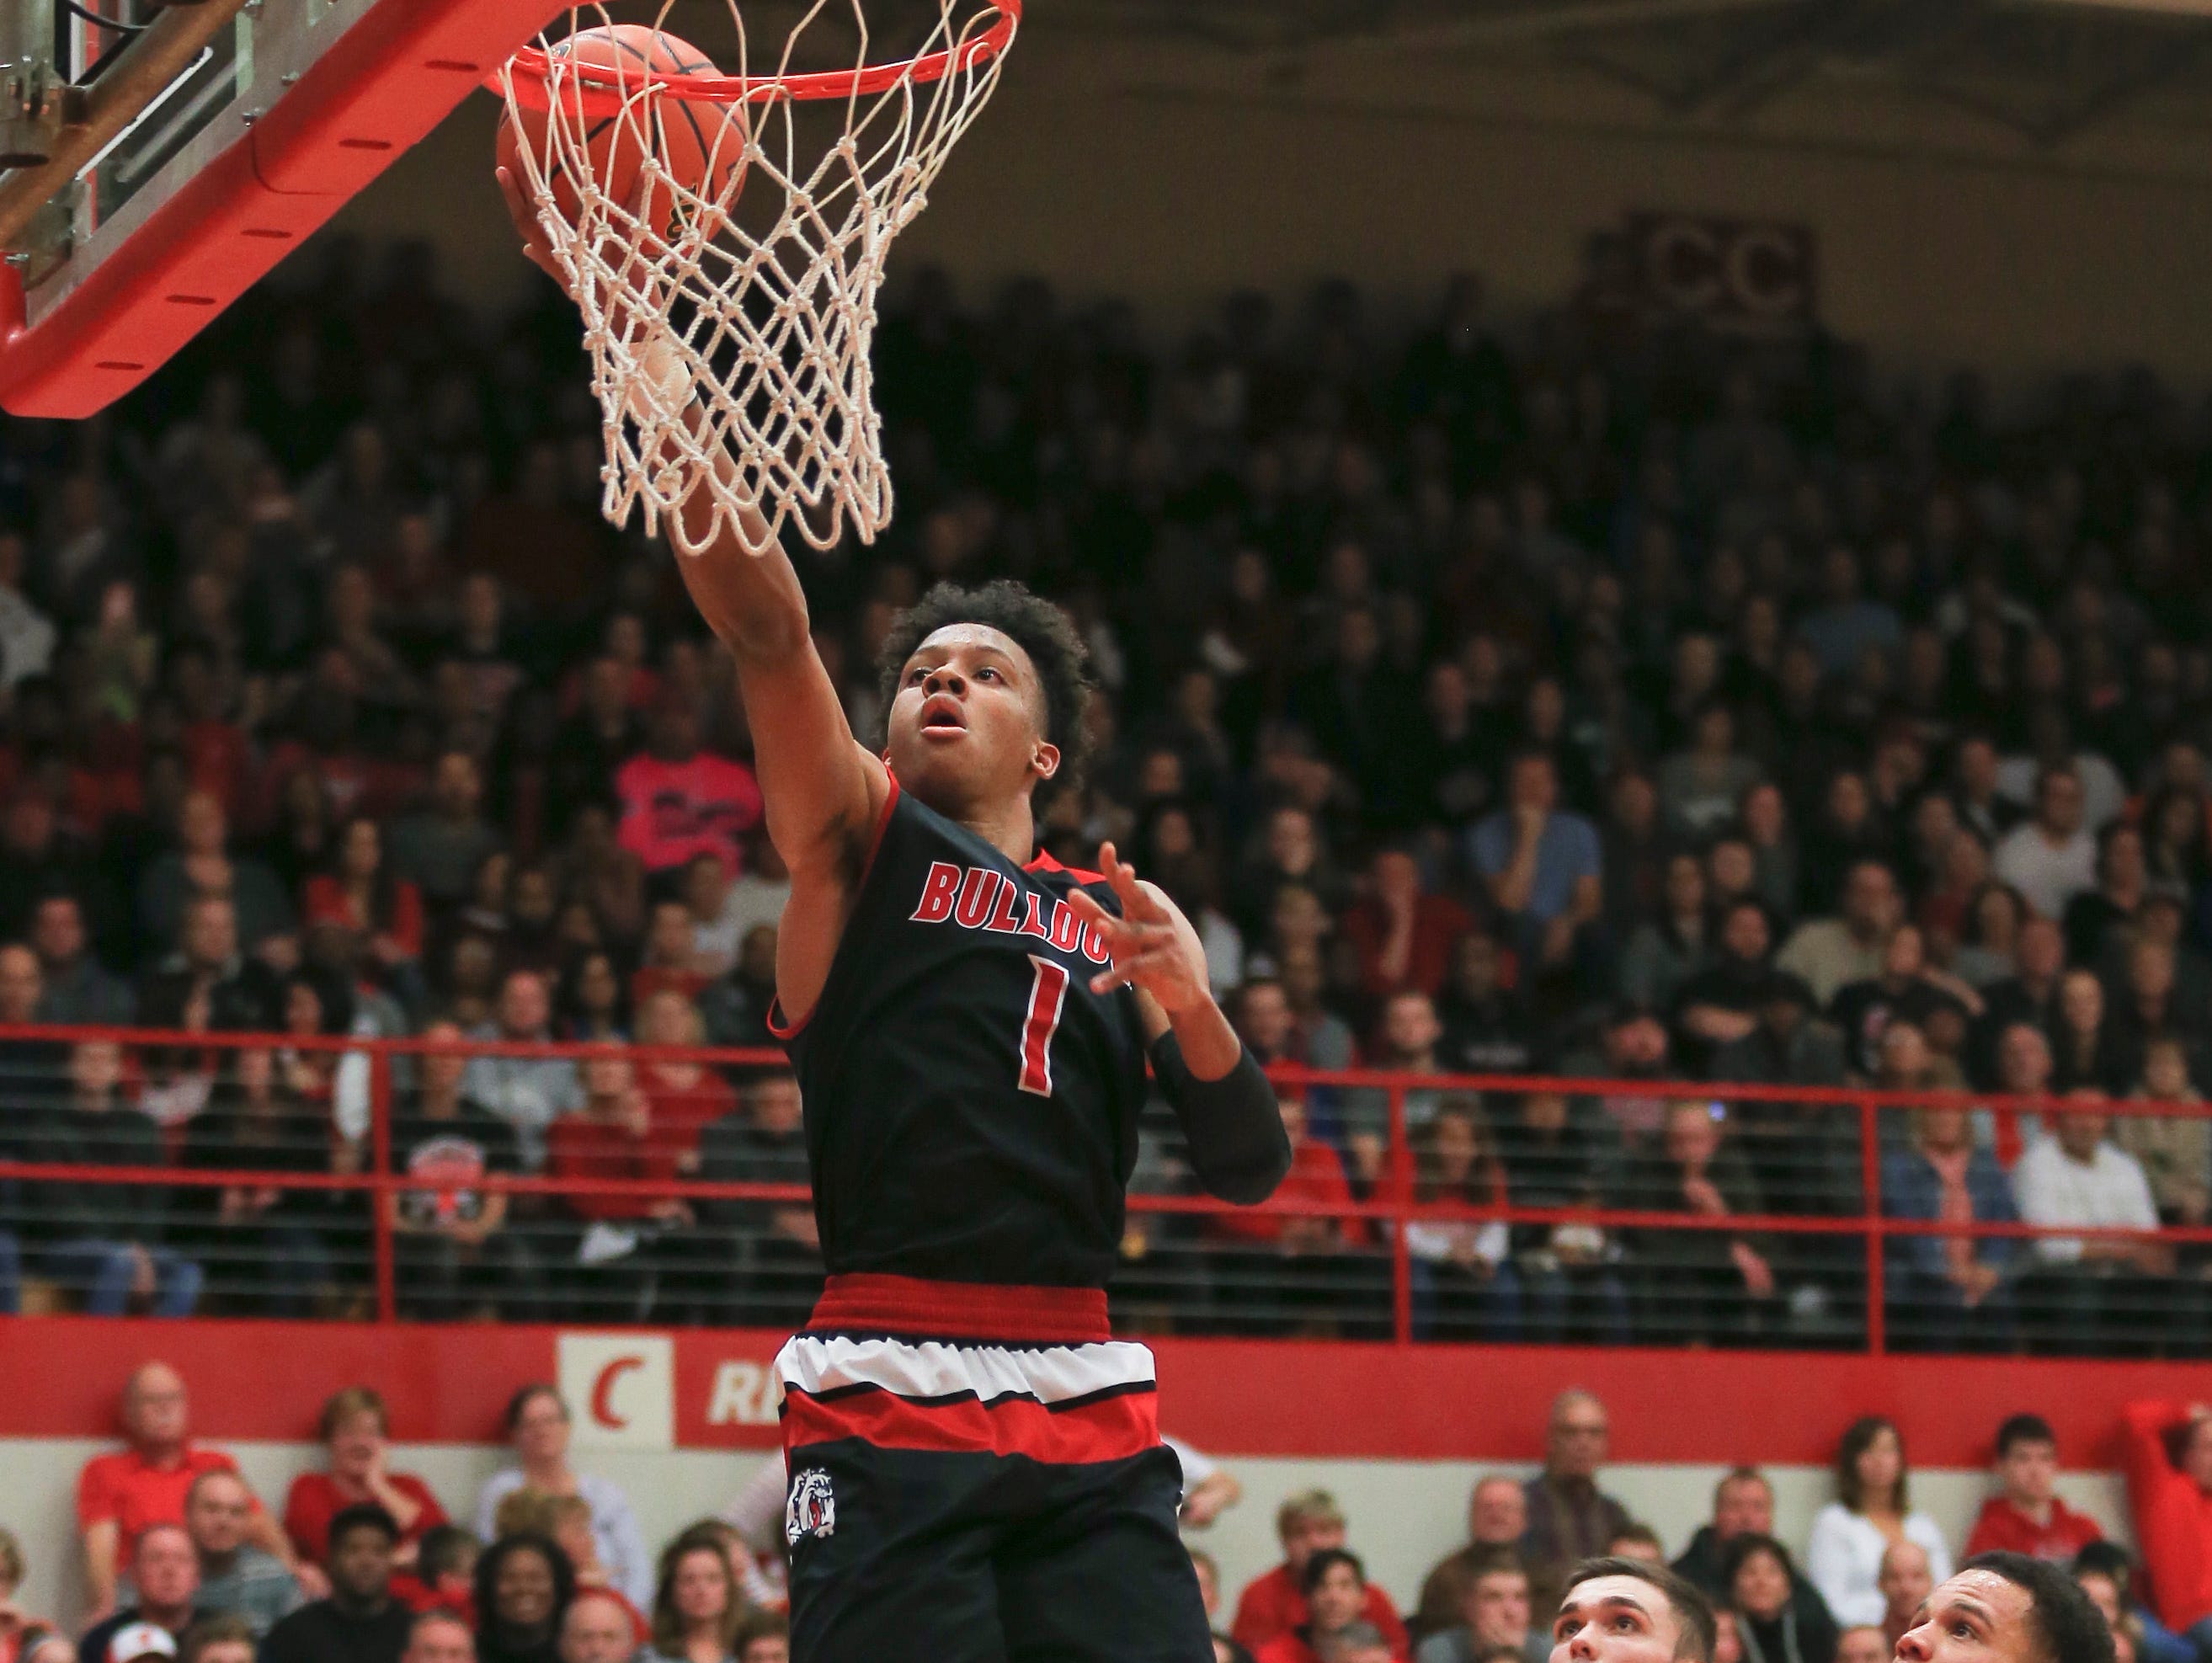 New Albany's Romeo Langford had 32 points with seven rebounds and four assists in the Bulldogs' 67-56 win over Jeffersonville Friday night.